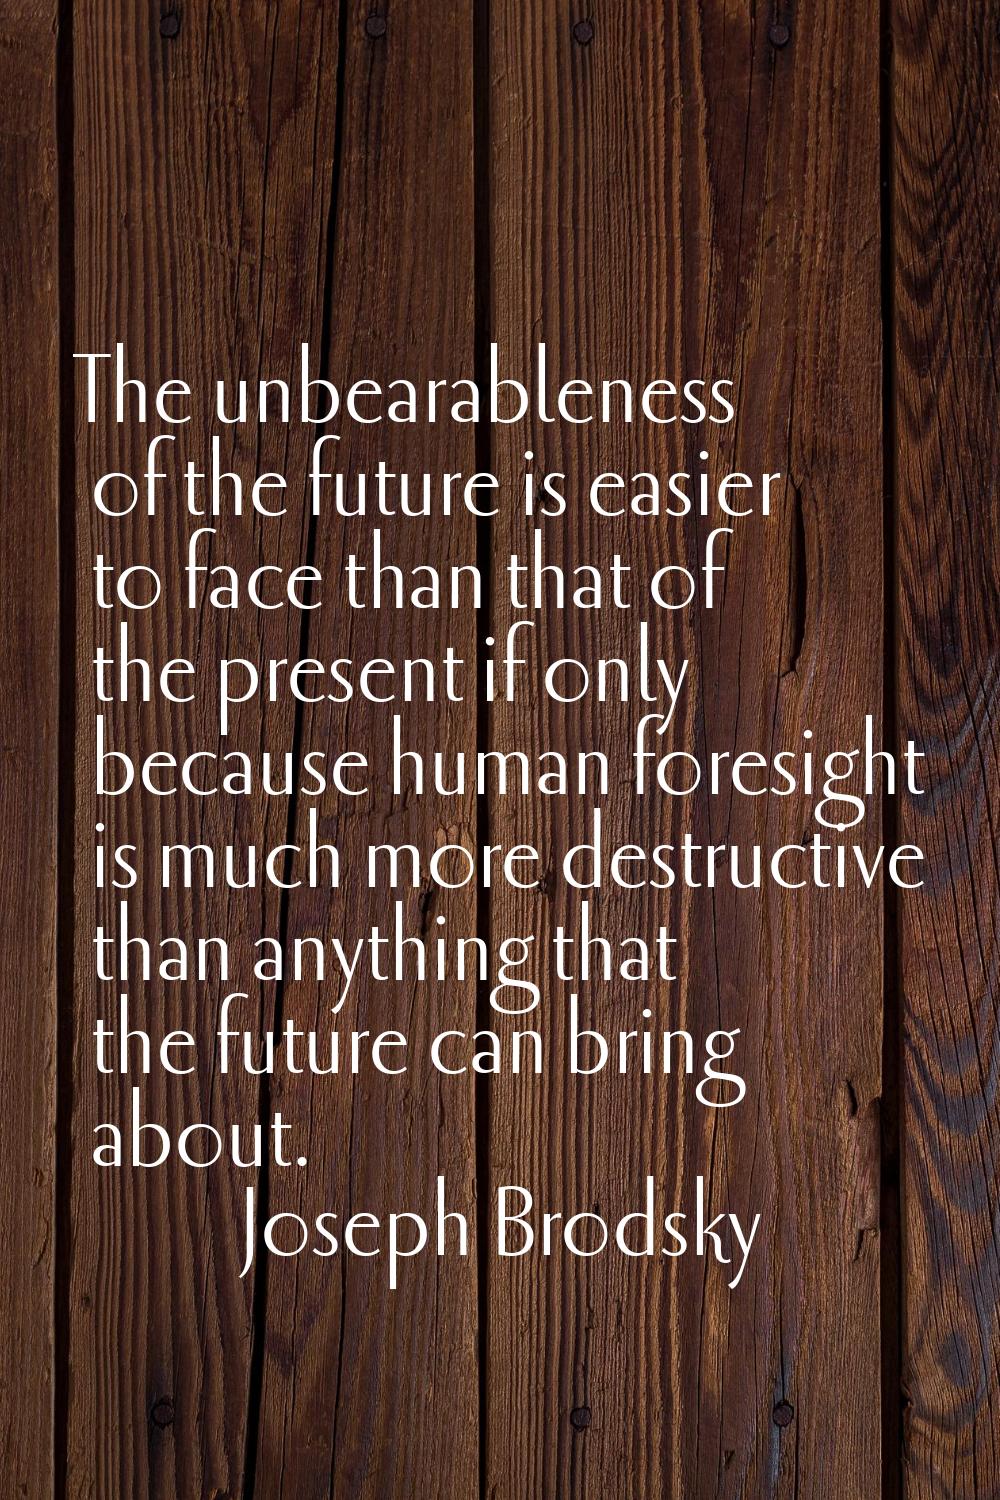 The unbearableness of the future is easier to face than that of the present if only because human f